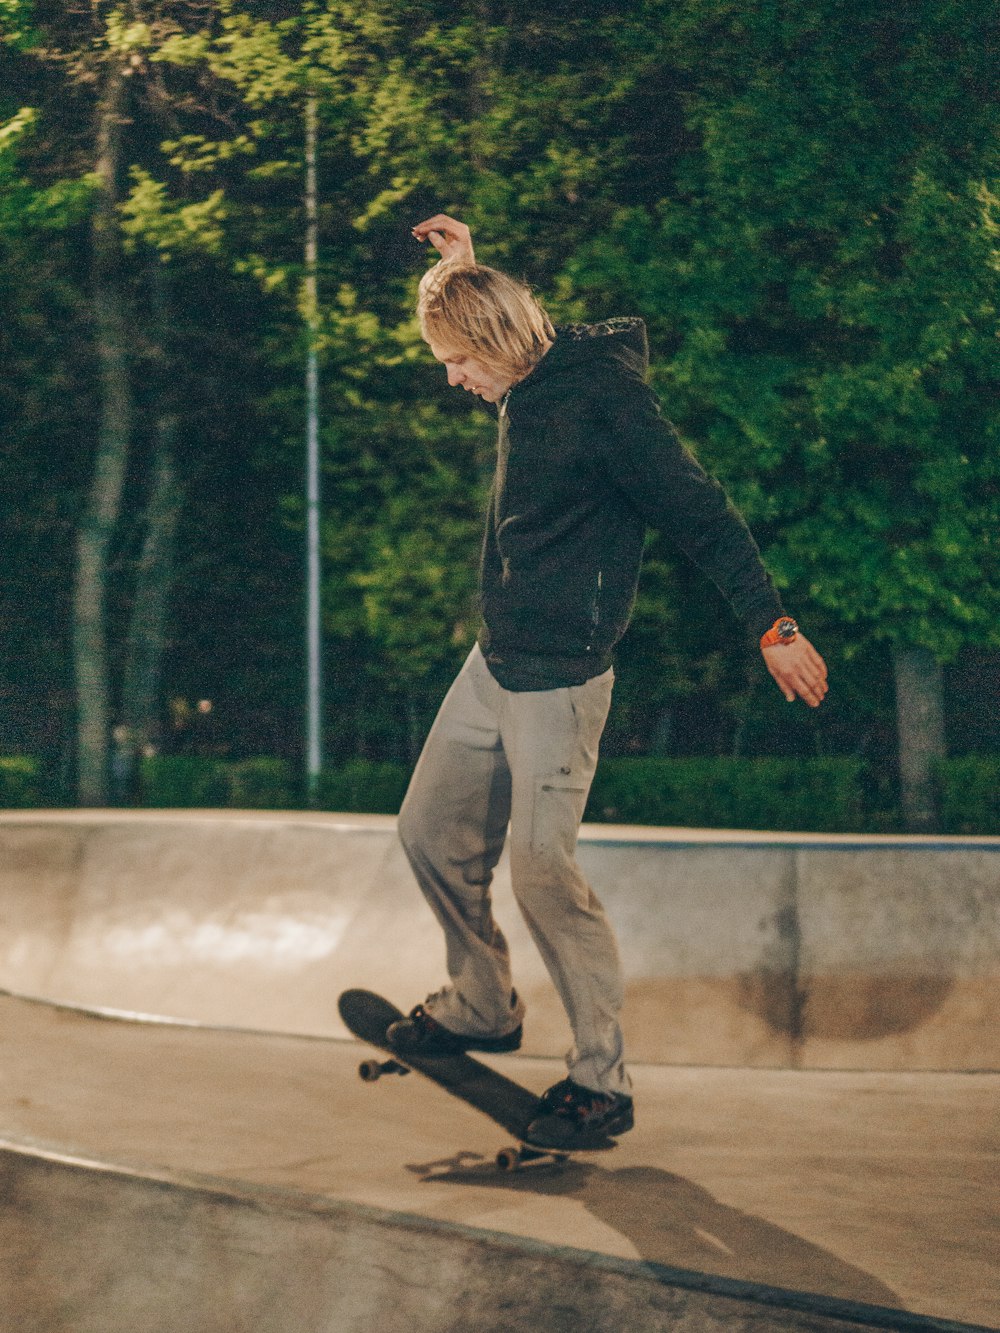 man riding skateboard on concrete field during night time